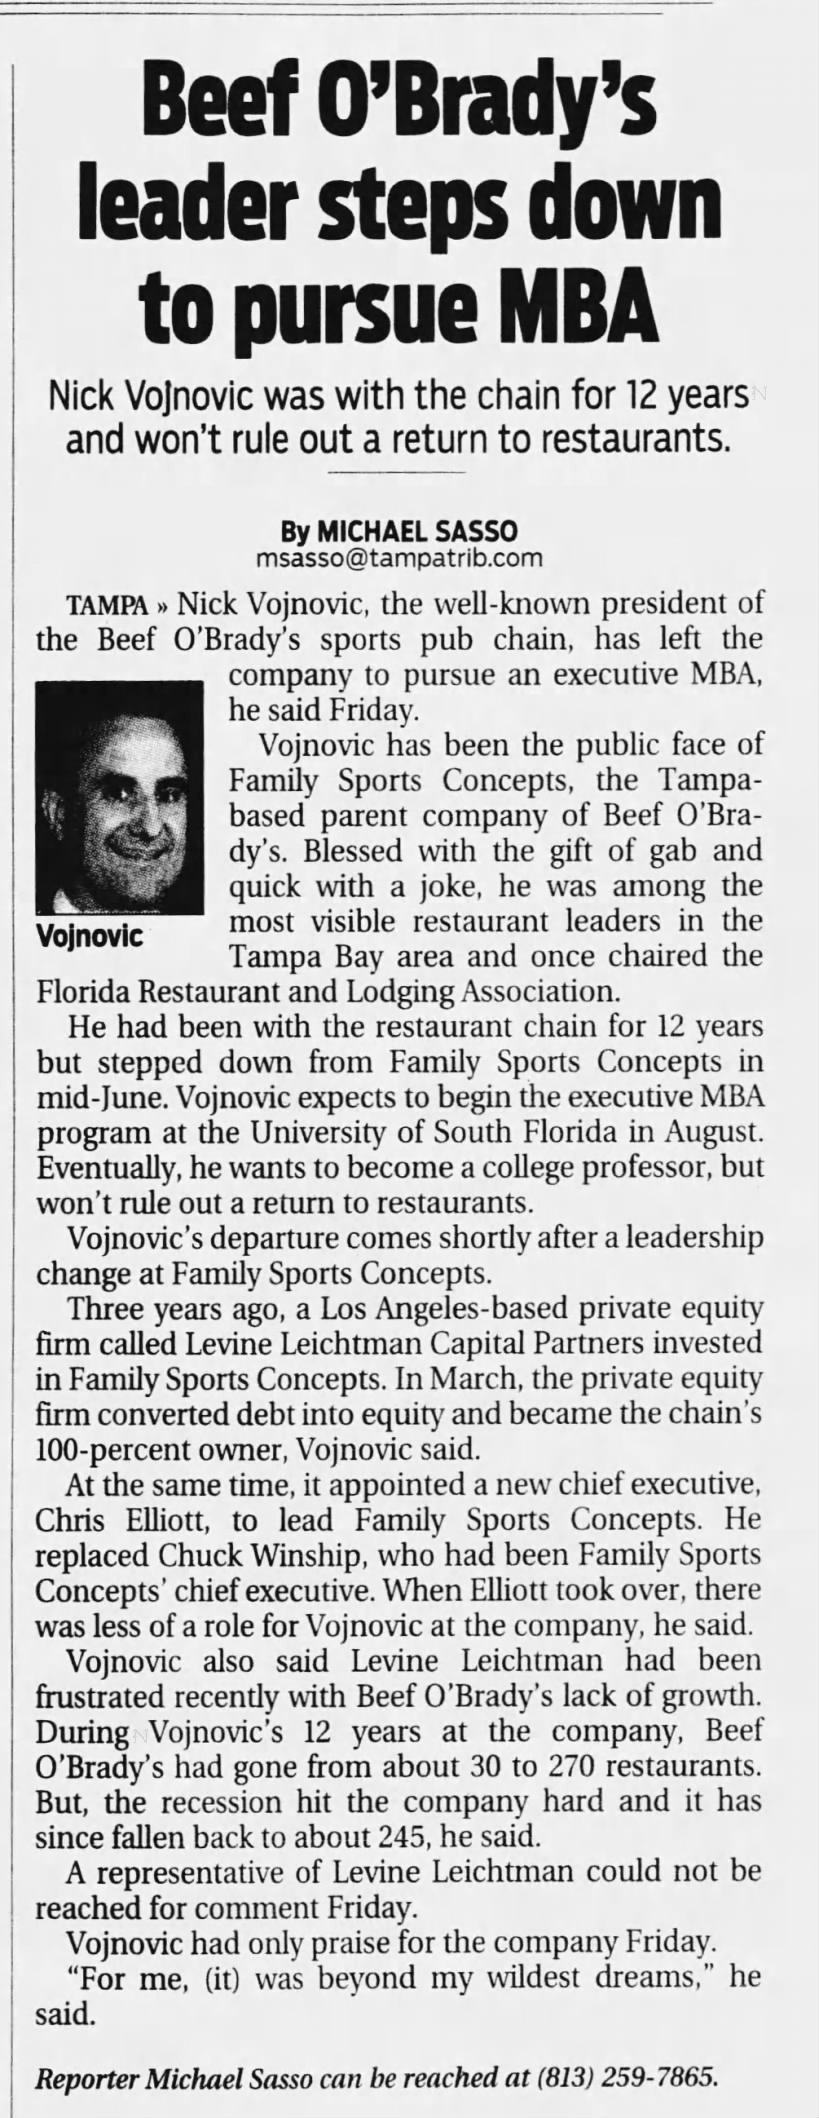 Beef O'Brady's leader steps down to pursue MBA